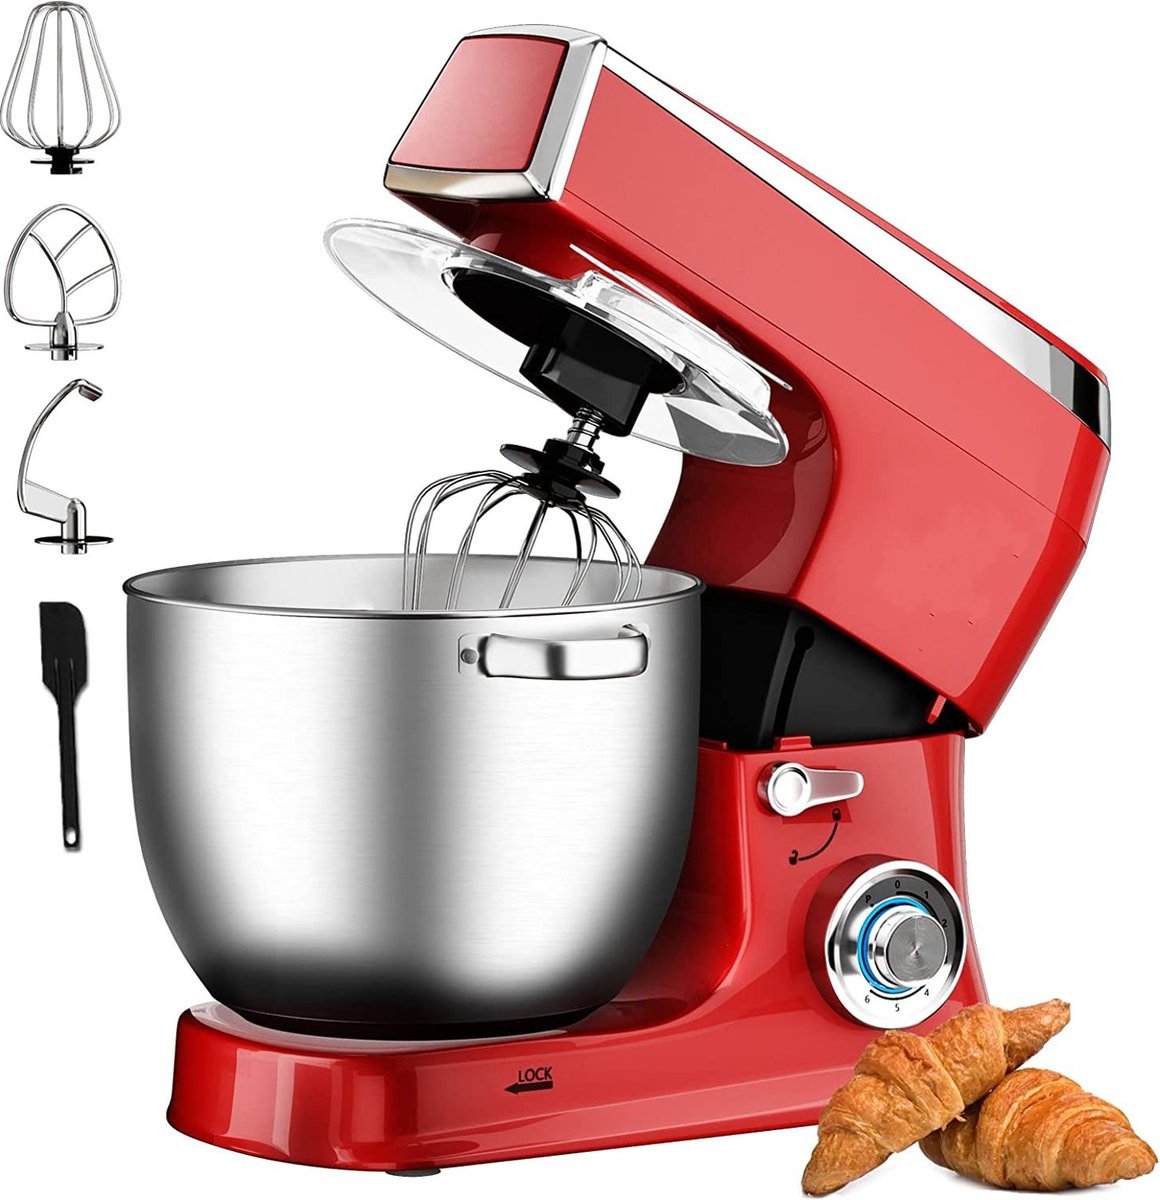 Planetary Mixer With Whisk, Dough Hook, Mixing Hook, Pan Scraper, With Splash Guard & Stainless Steel Mixing Bowl 7.5 L- 2100W - Red - Royalty Line